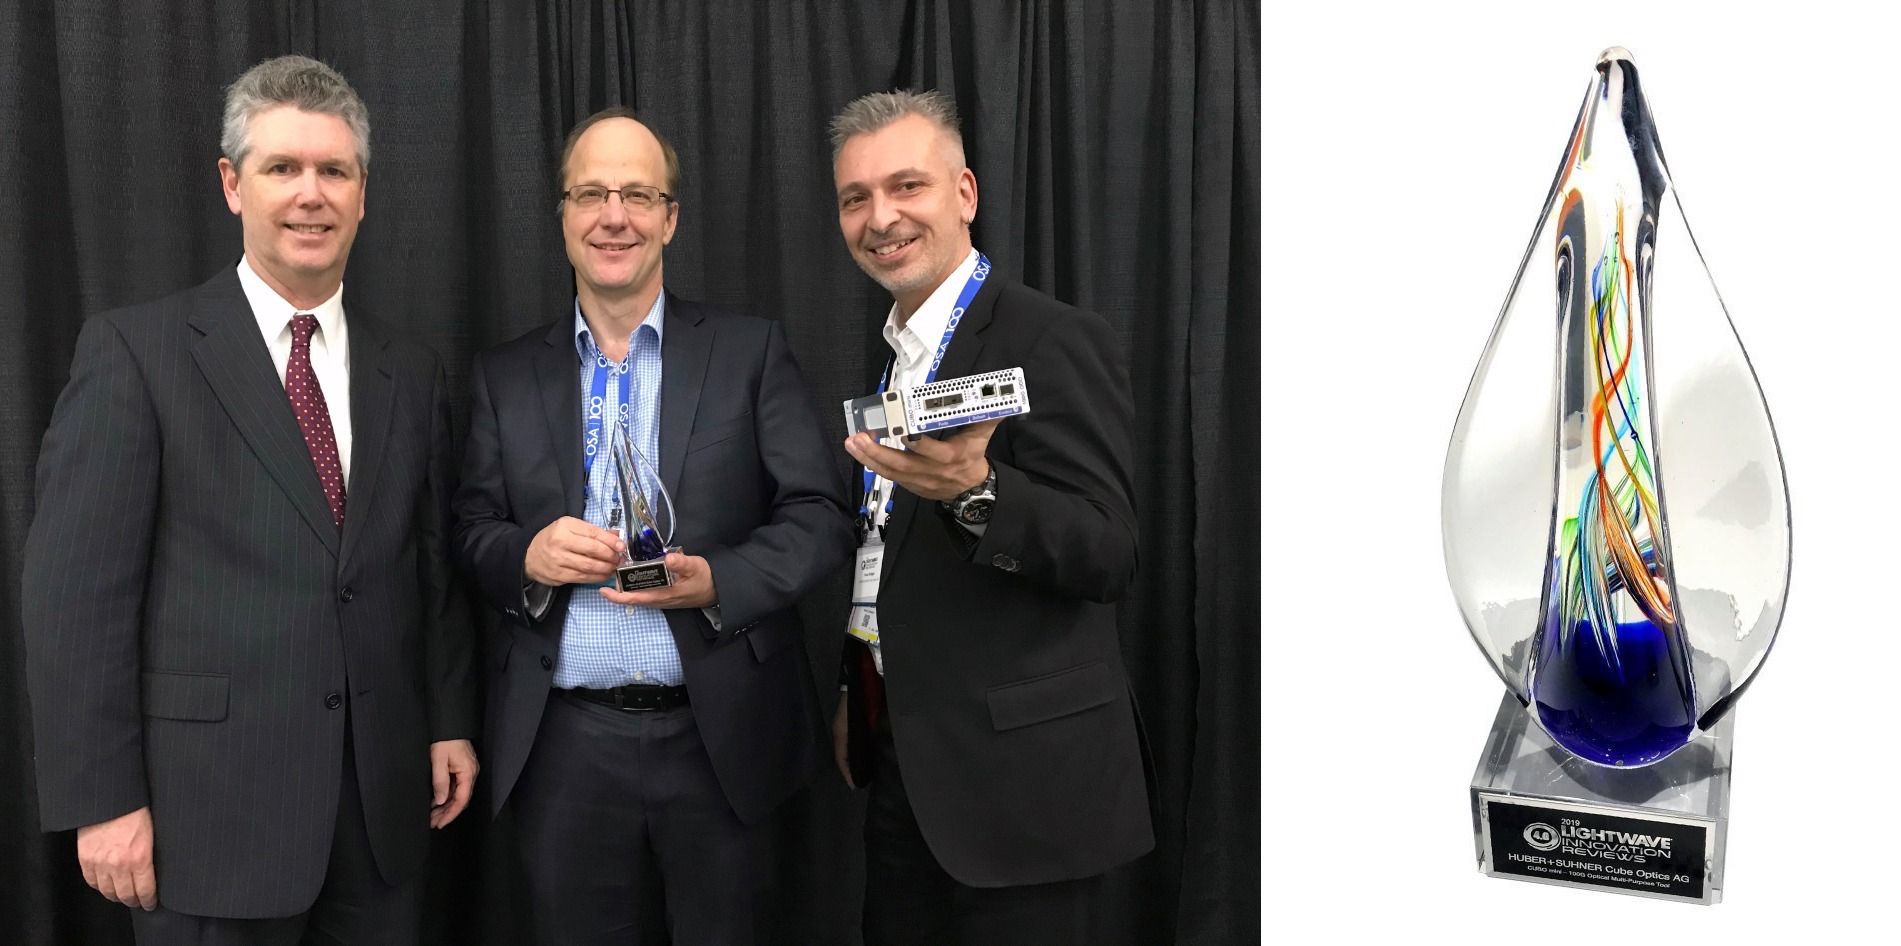 March 2019 Connector Industry News: HUBER+SUHNER Cube Optics received a 2019 Lightwave Innovation Reviews Program Award for its CUBO Mini 100G Optical Multi-Purpose Tool 